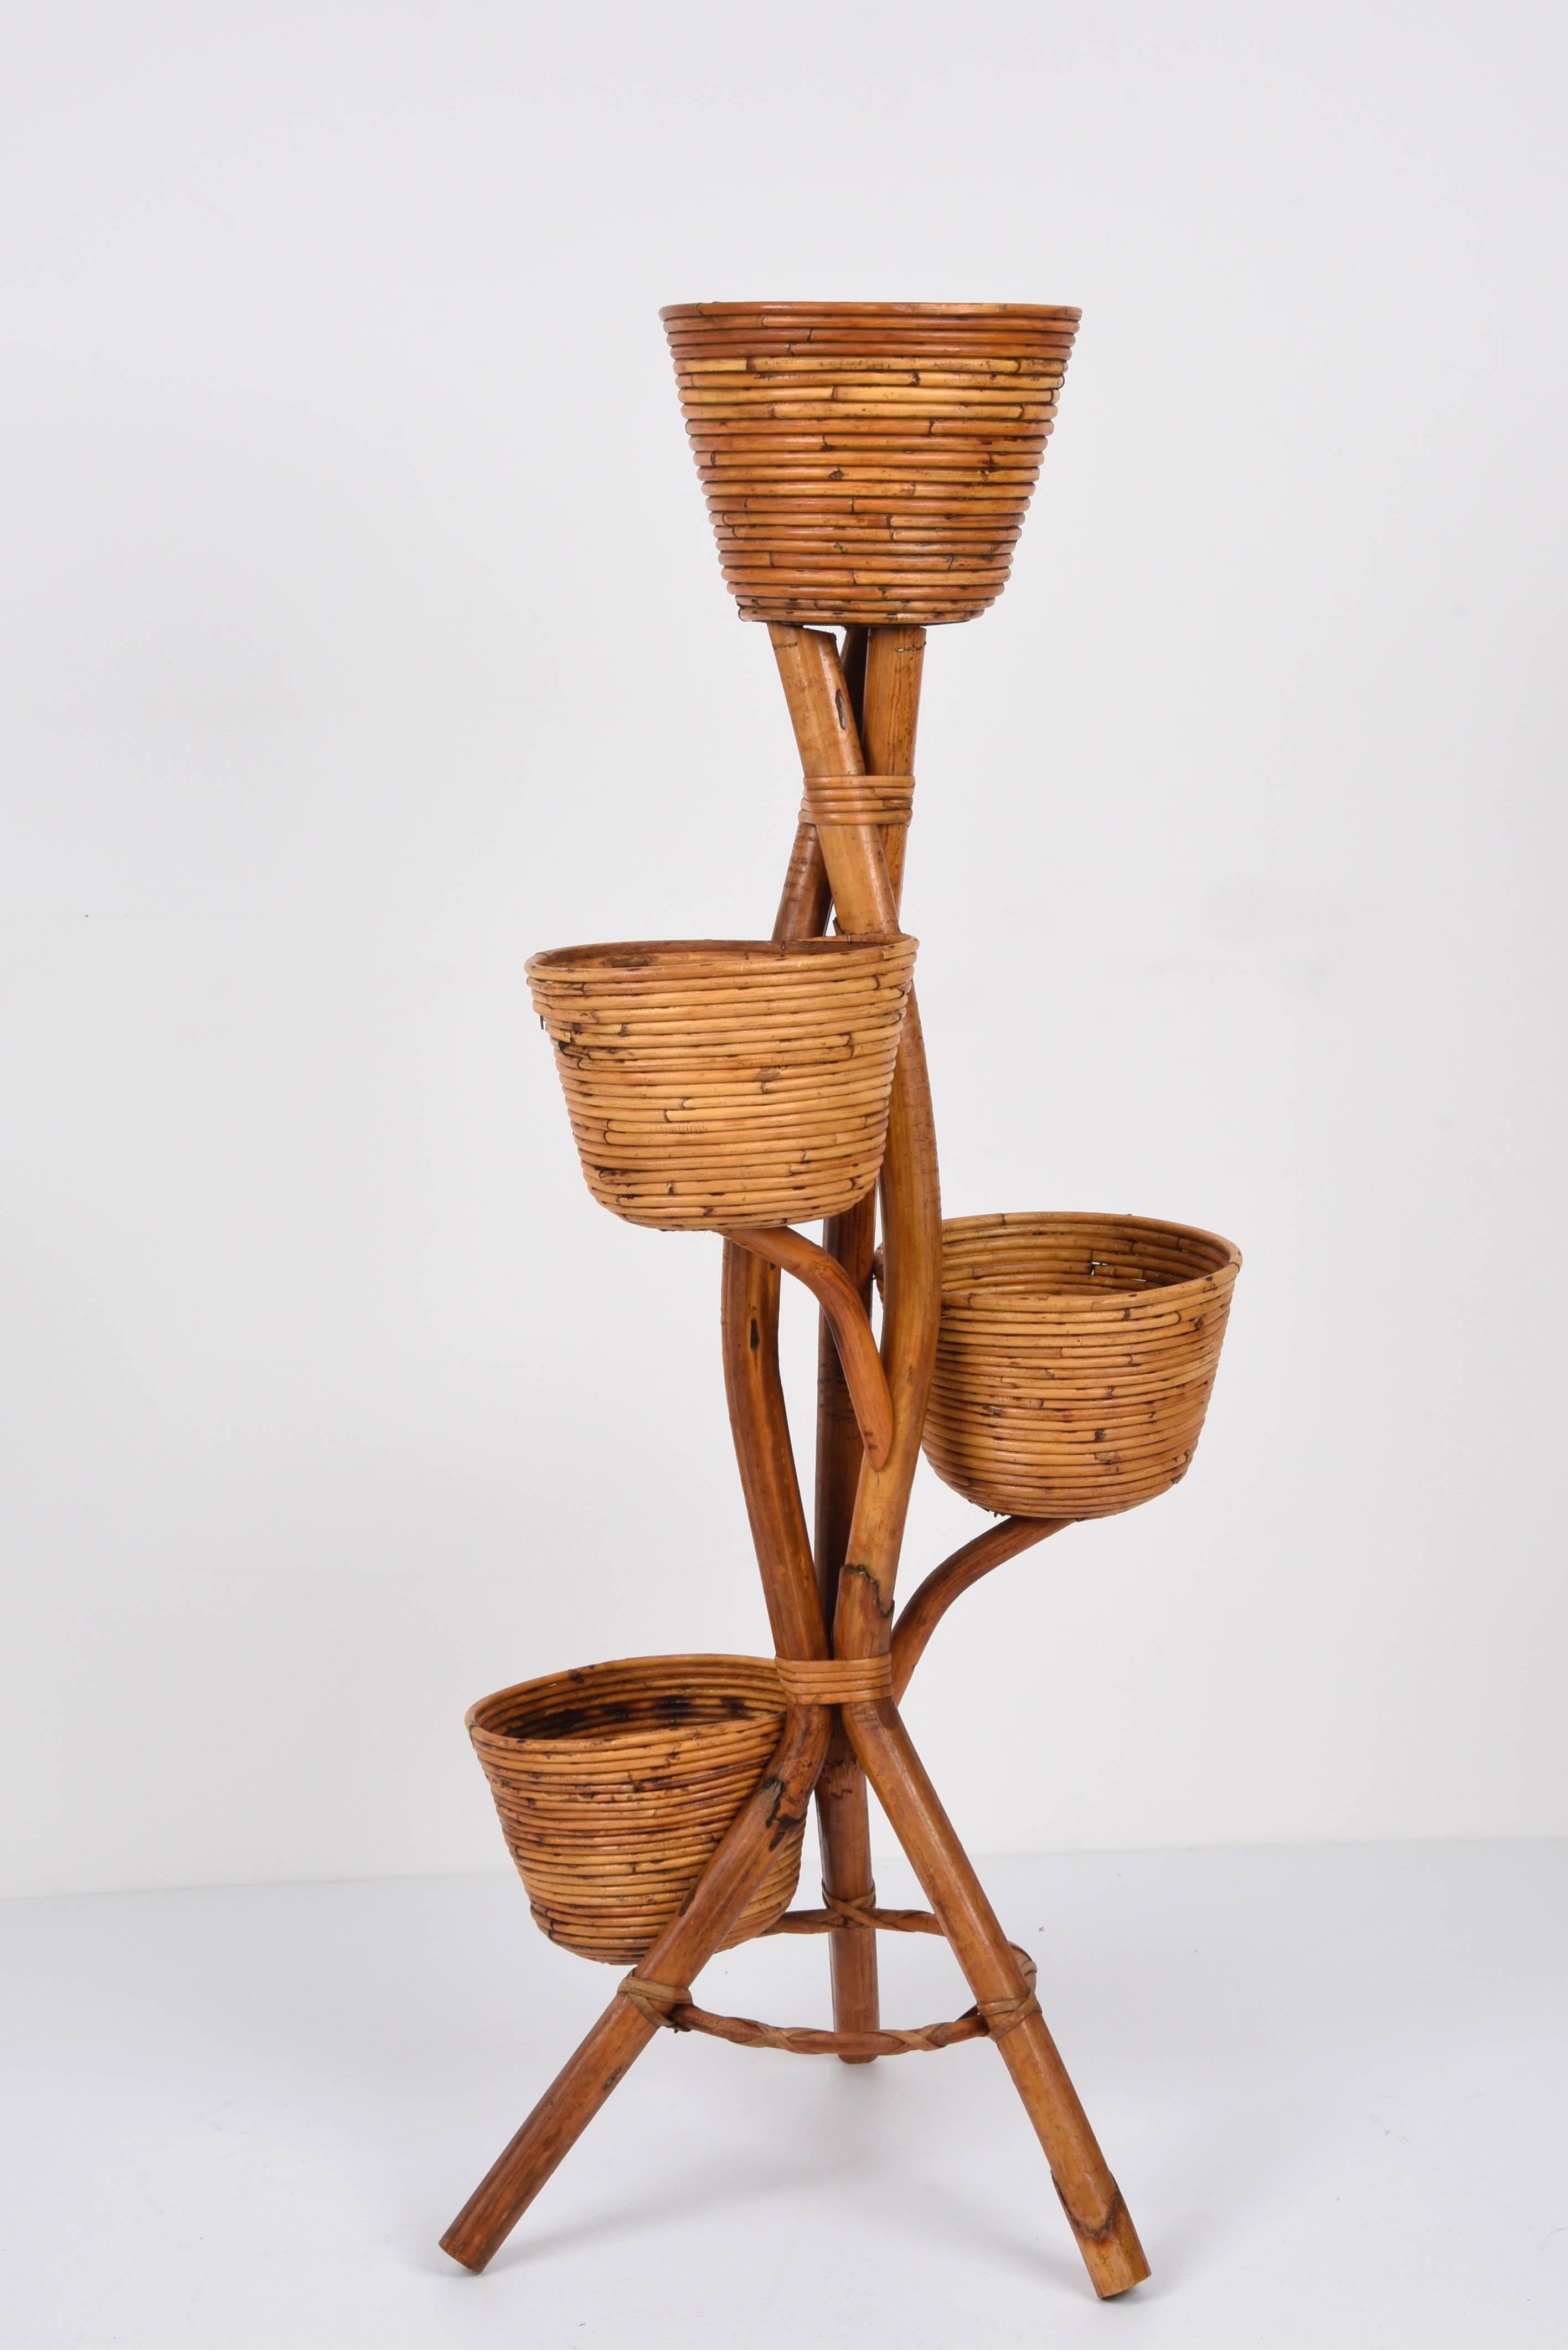 Amazing midcentury flowers or plant holder in bamboo and wicker. This fantastic item was designed in Italy during the 1950s.

This magnificent piece has a sinuous bamboo structure with a tripod base, while the fantastic plant holders are made of